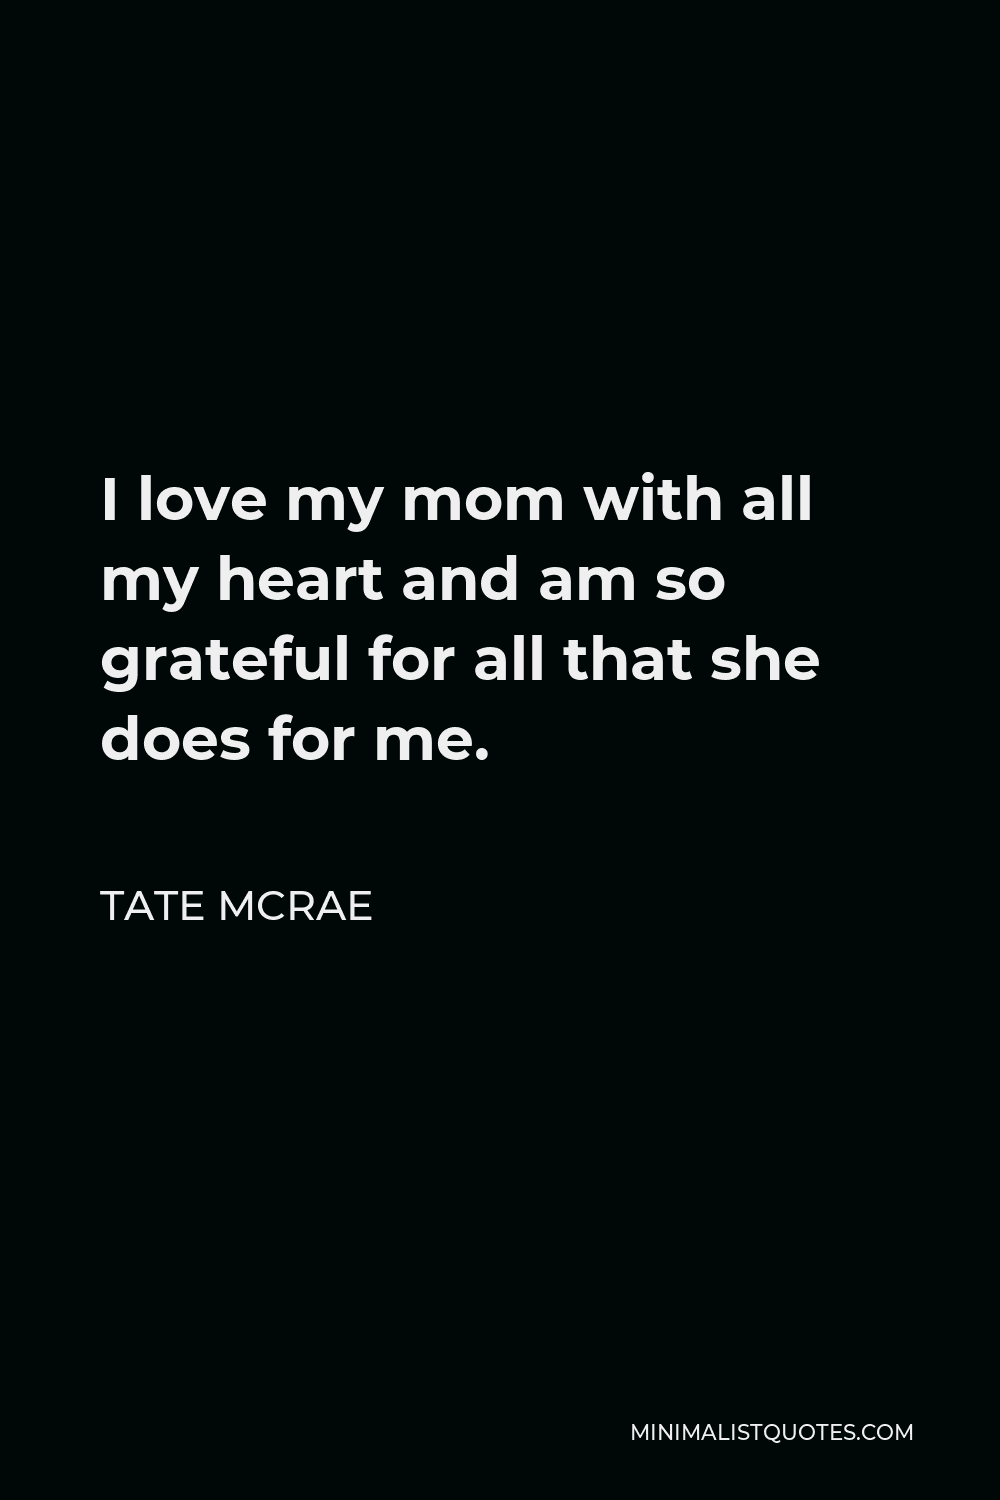 Tate McRae Quote - I love my mom with all my heart and am so grateful for all that she does for me.